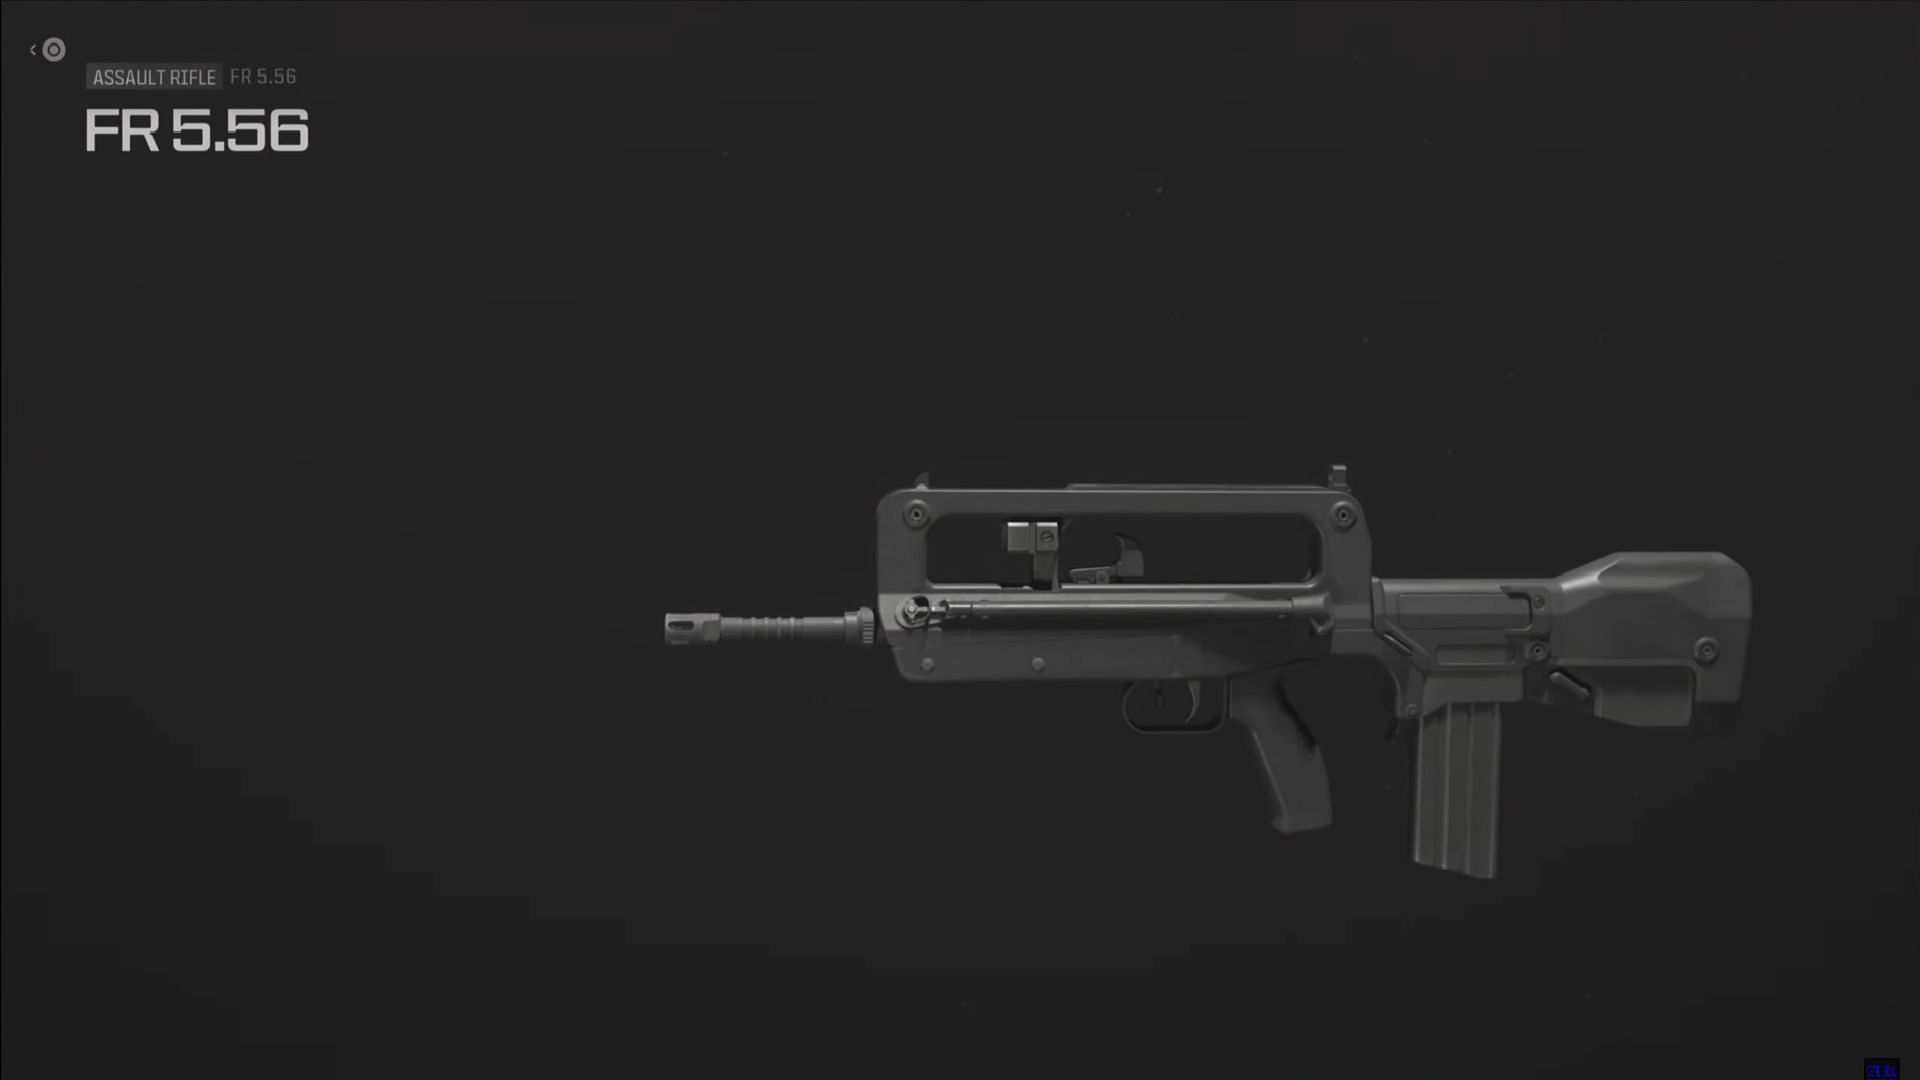 FR 5.56 weapon in Warzone (Image via Activision)